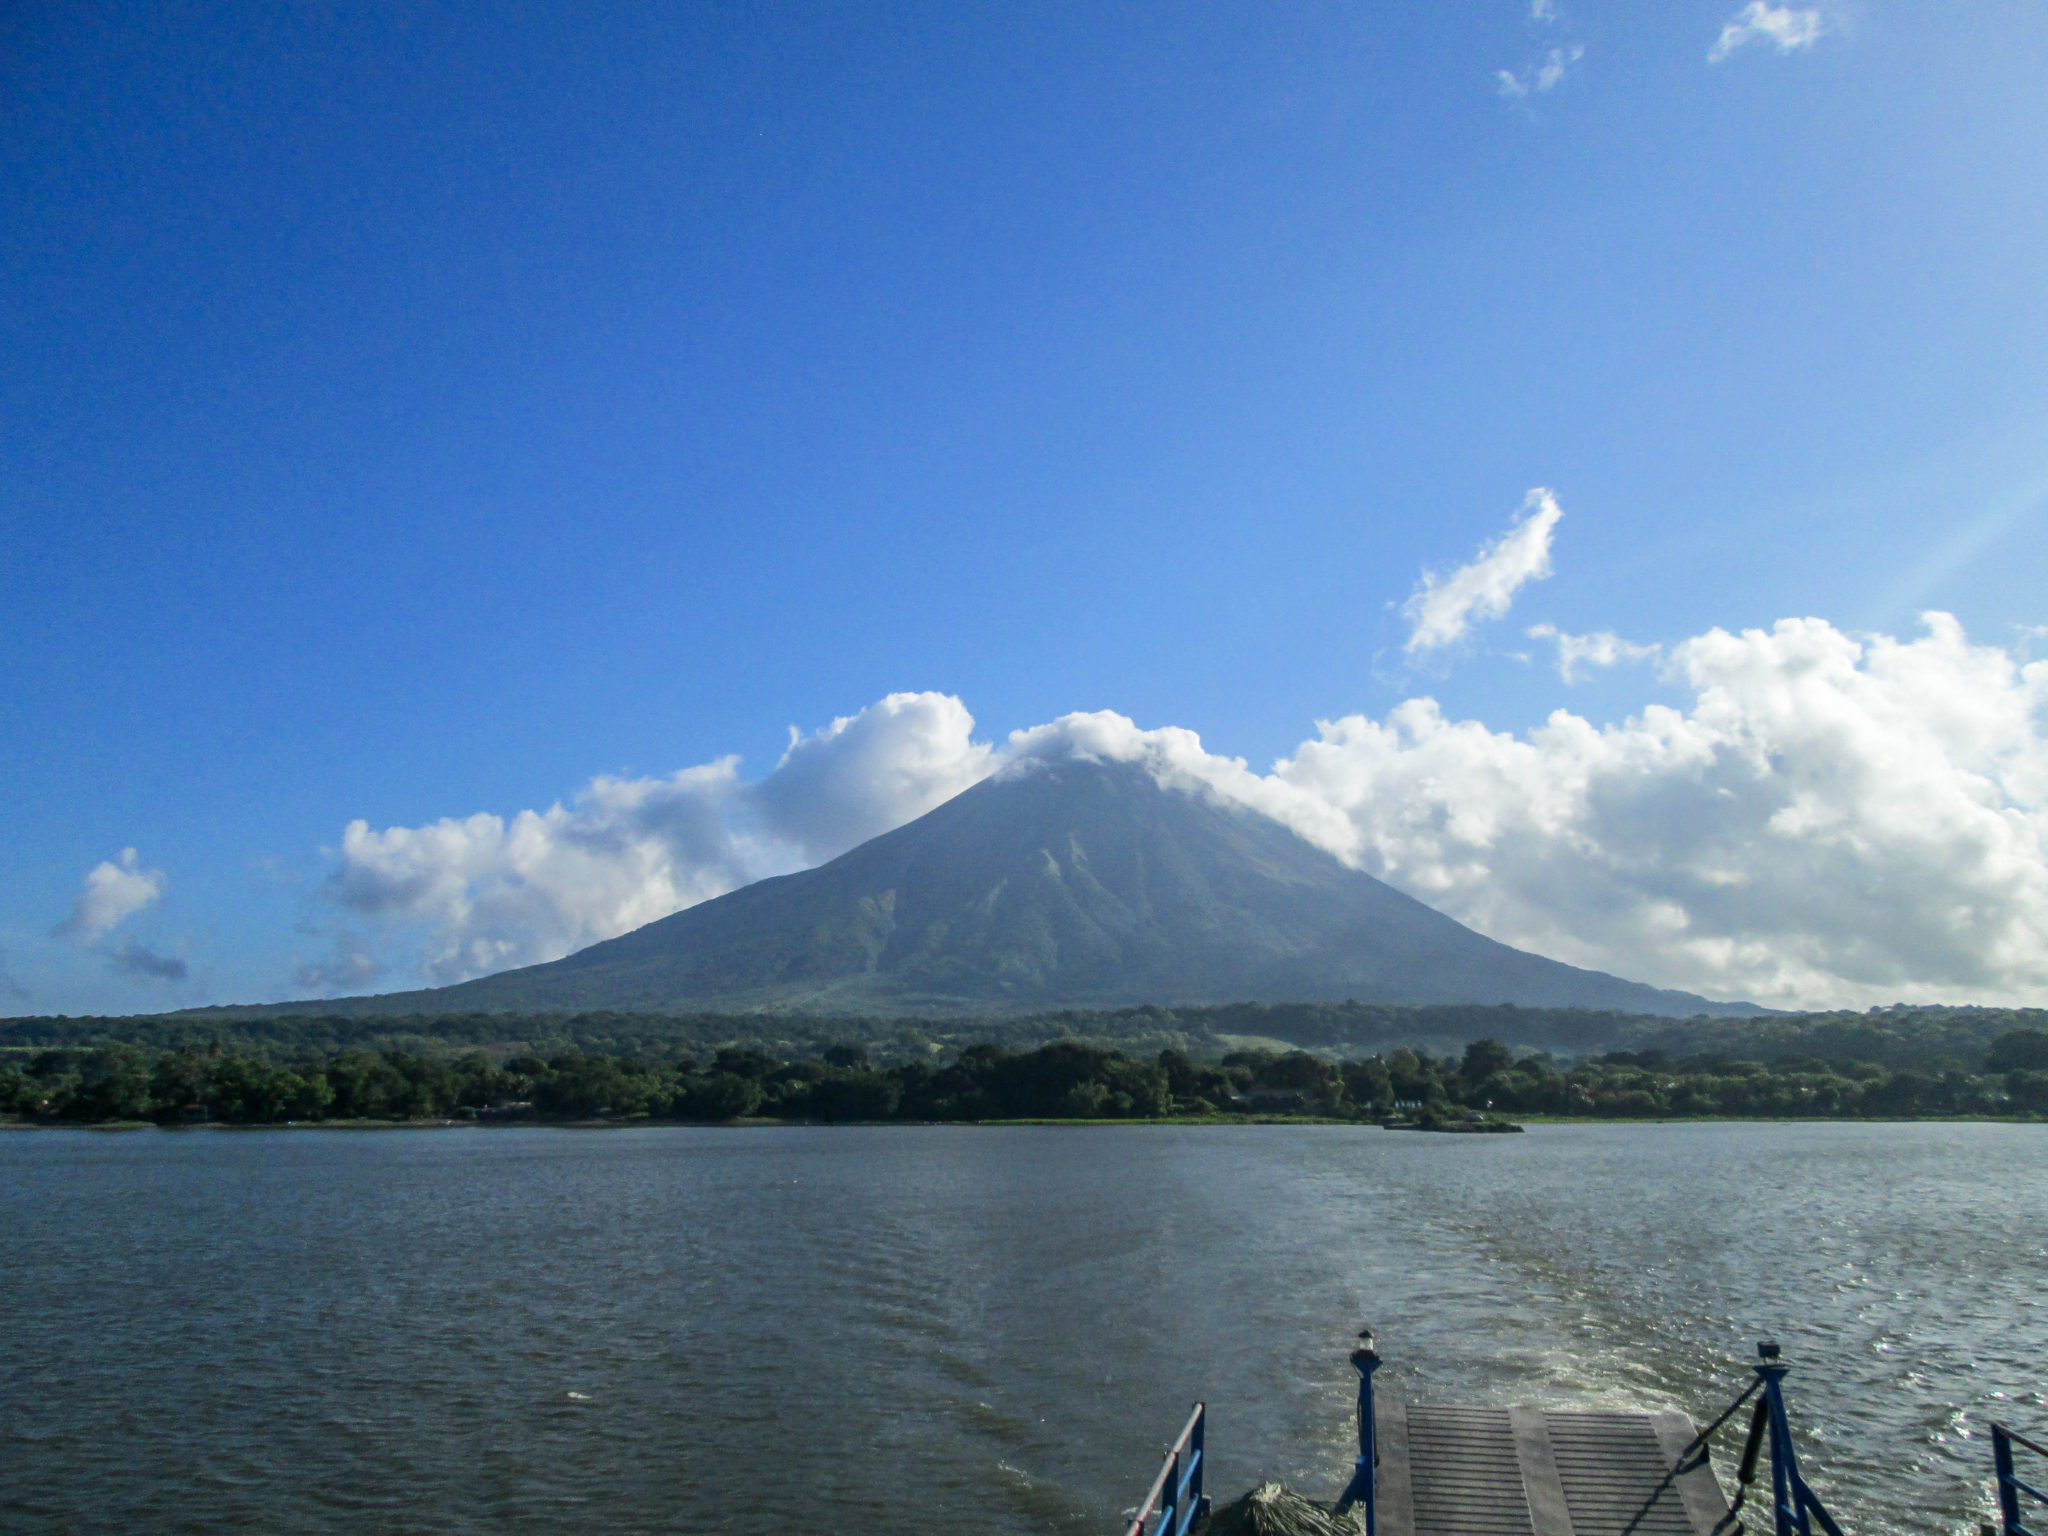 Concepcion Volcano has a perfect cone top and is one of the two volcanos that makes up Ometepe Island